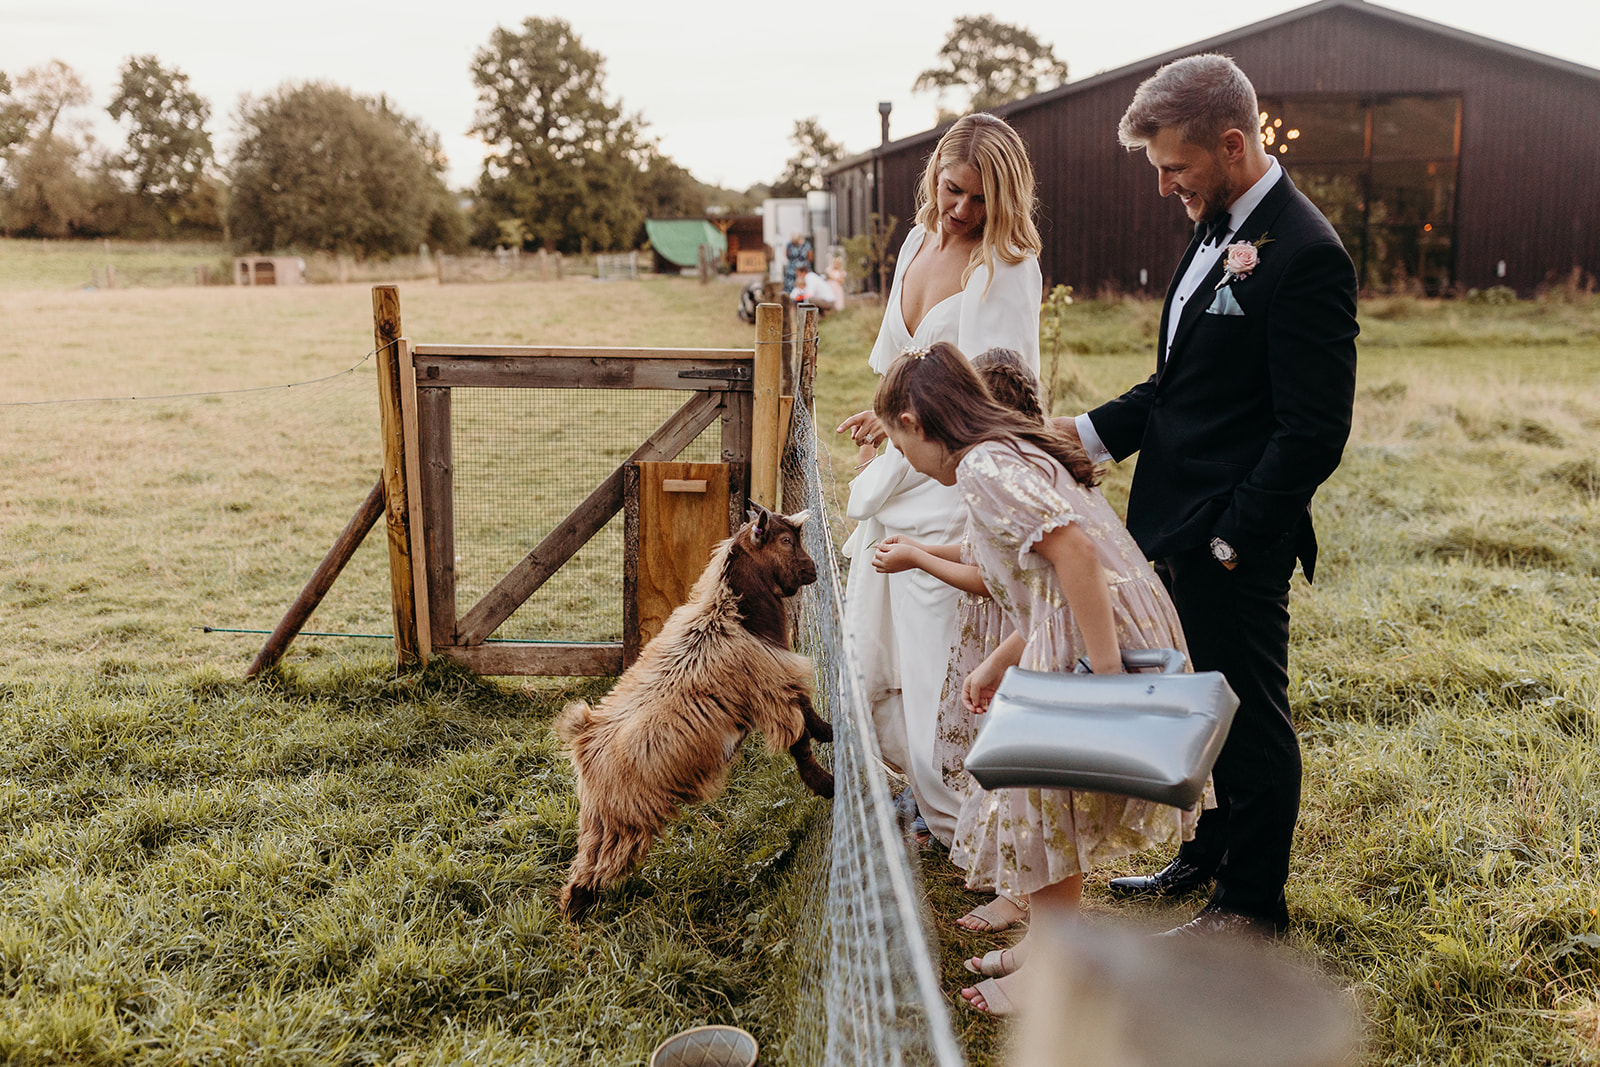 Bride and groom enjoying the company of the farm animals at their Hampshire wedding location.
